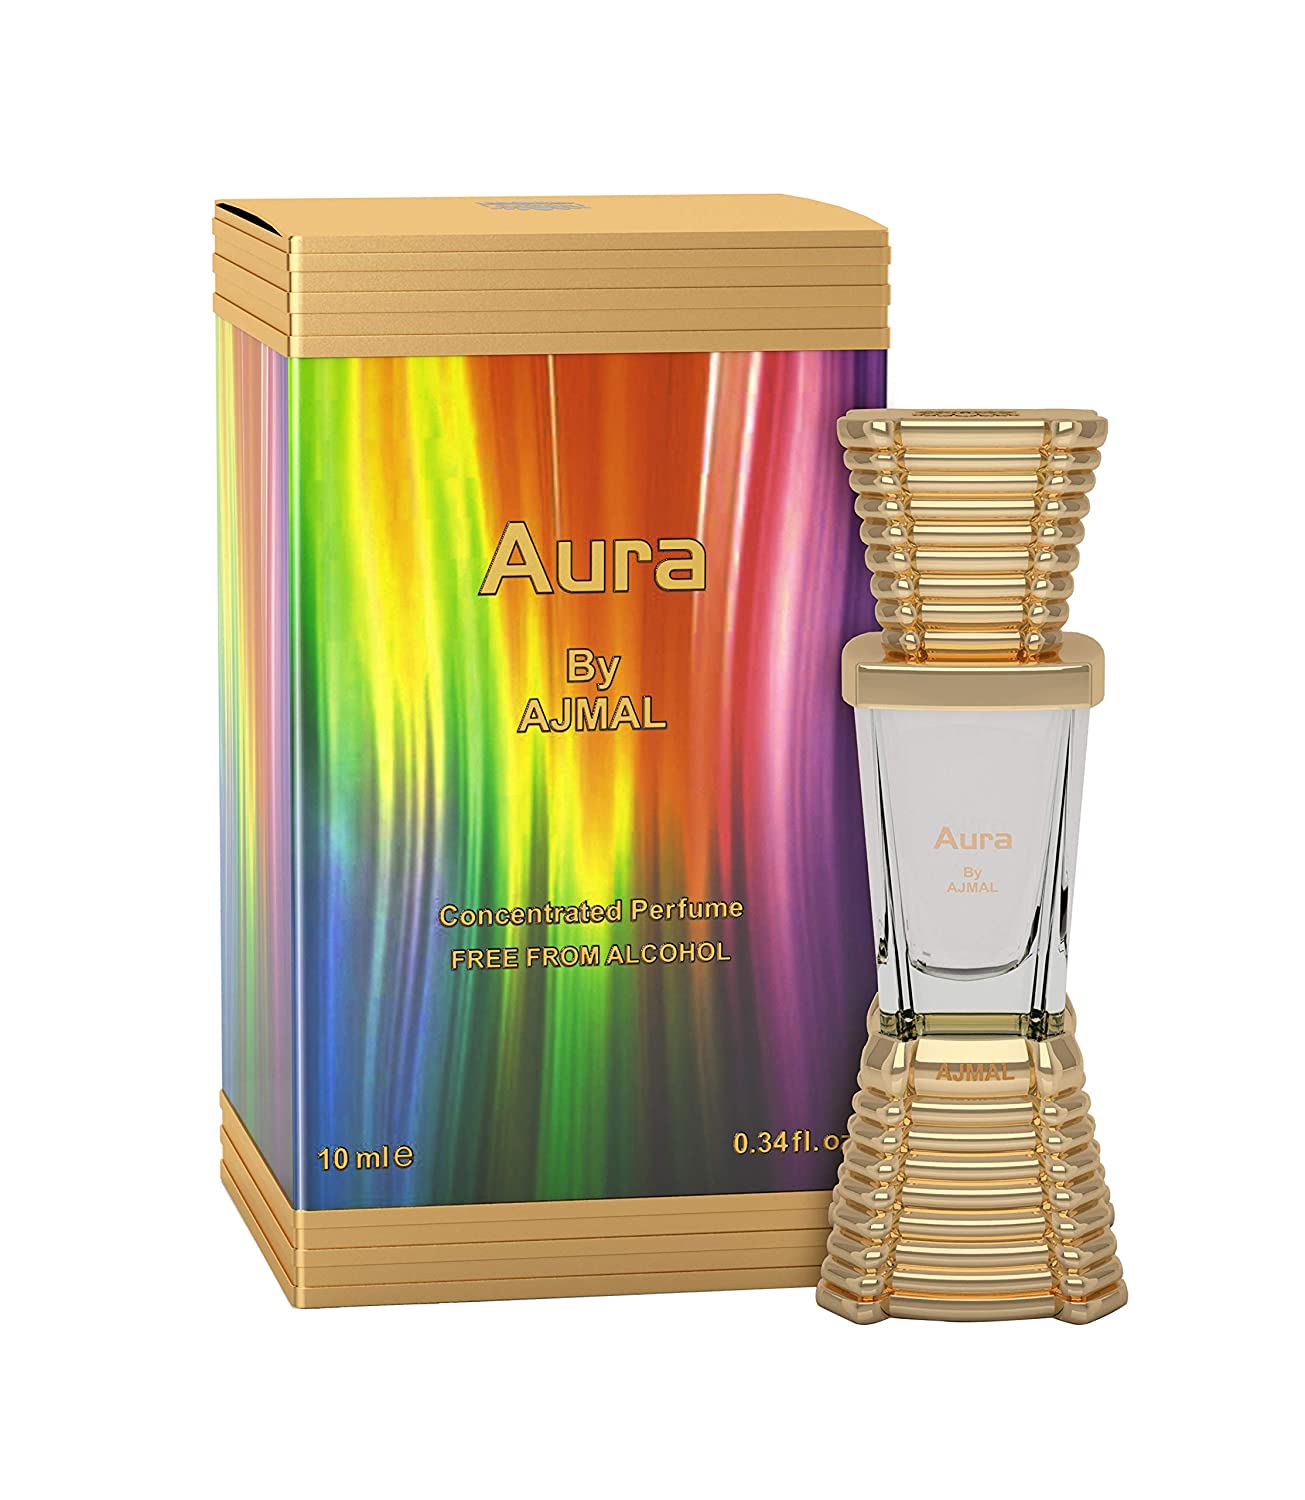 Aura By Ajmal Concentrated Perfume Free From Alcohol 10 ml